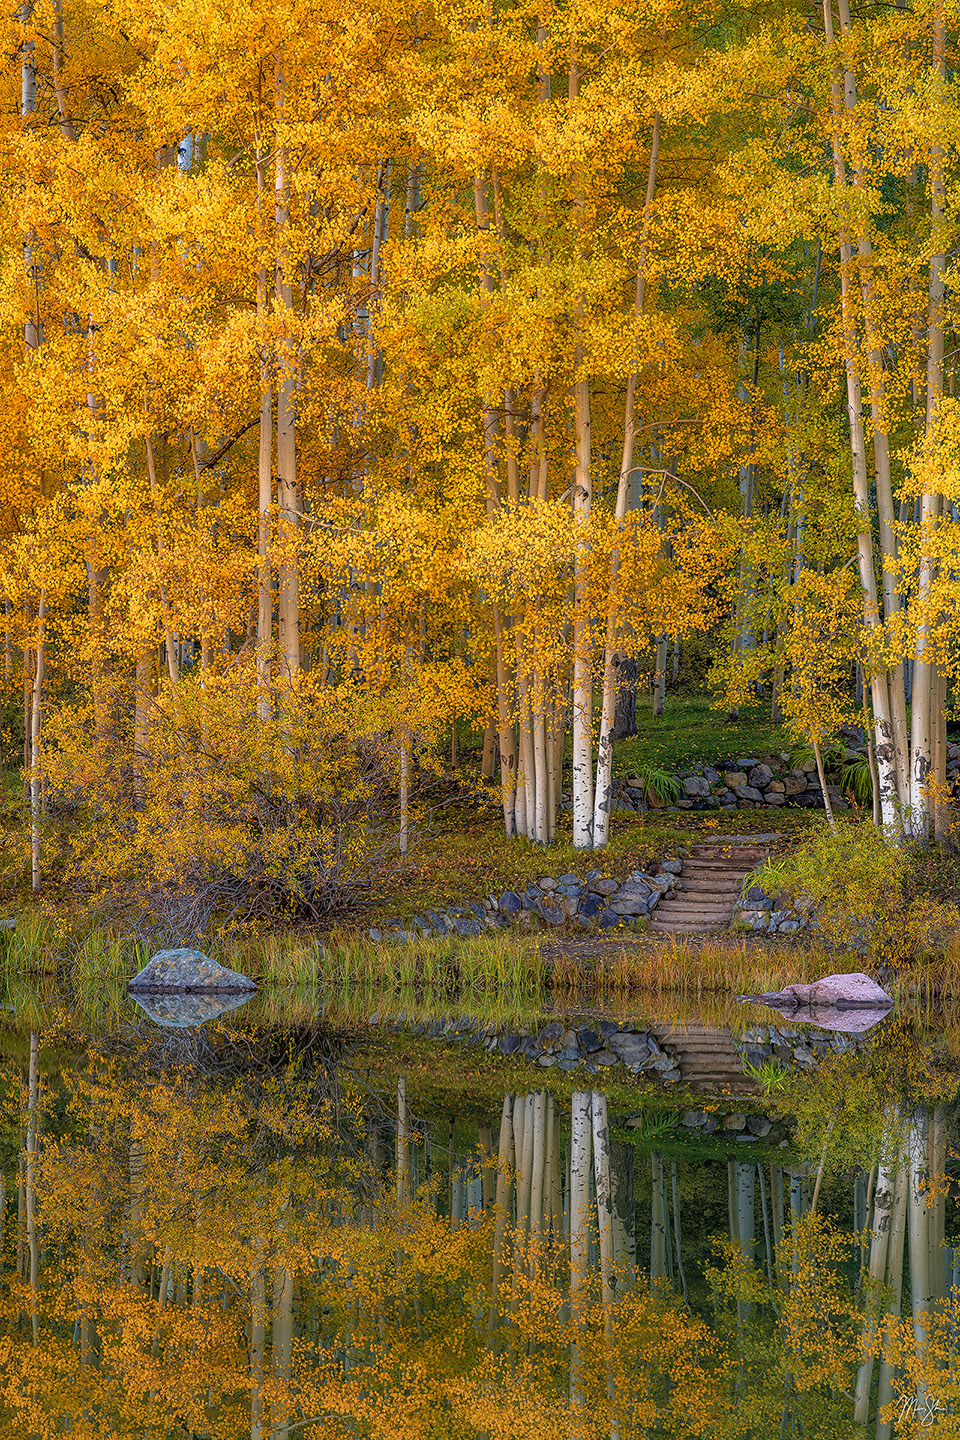 A pathway to the lake leads through an aspen forest at the height of fall colors. Lack of wind created a perfect reflection in the pond below. Also available in an ultra thin 1x3 vertical format and standard landscape format.